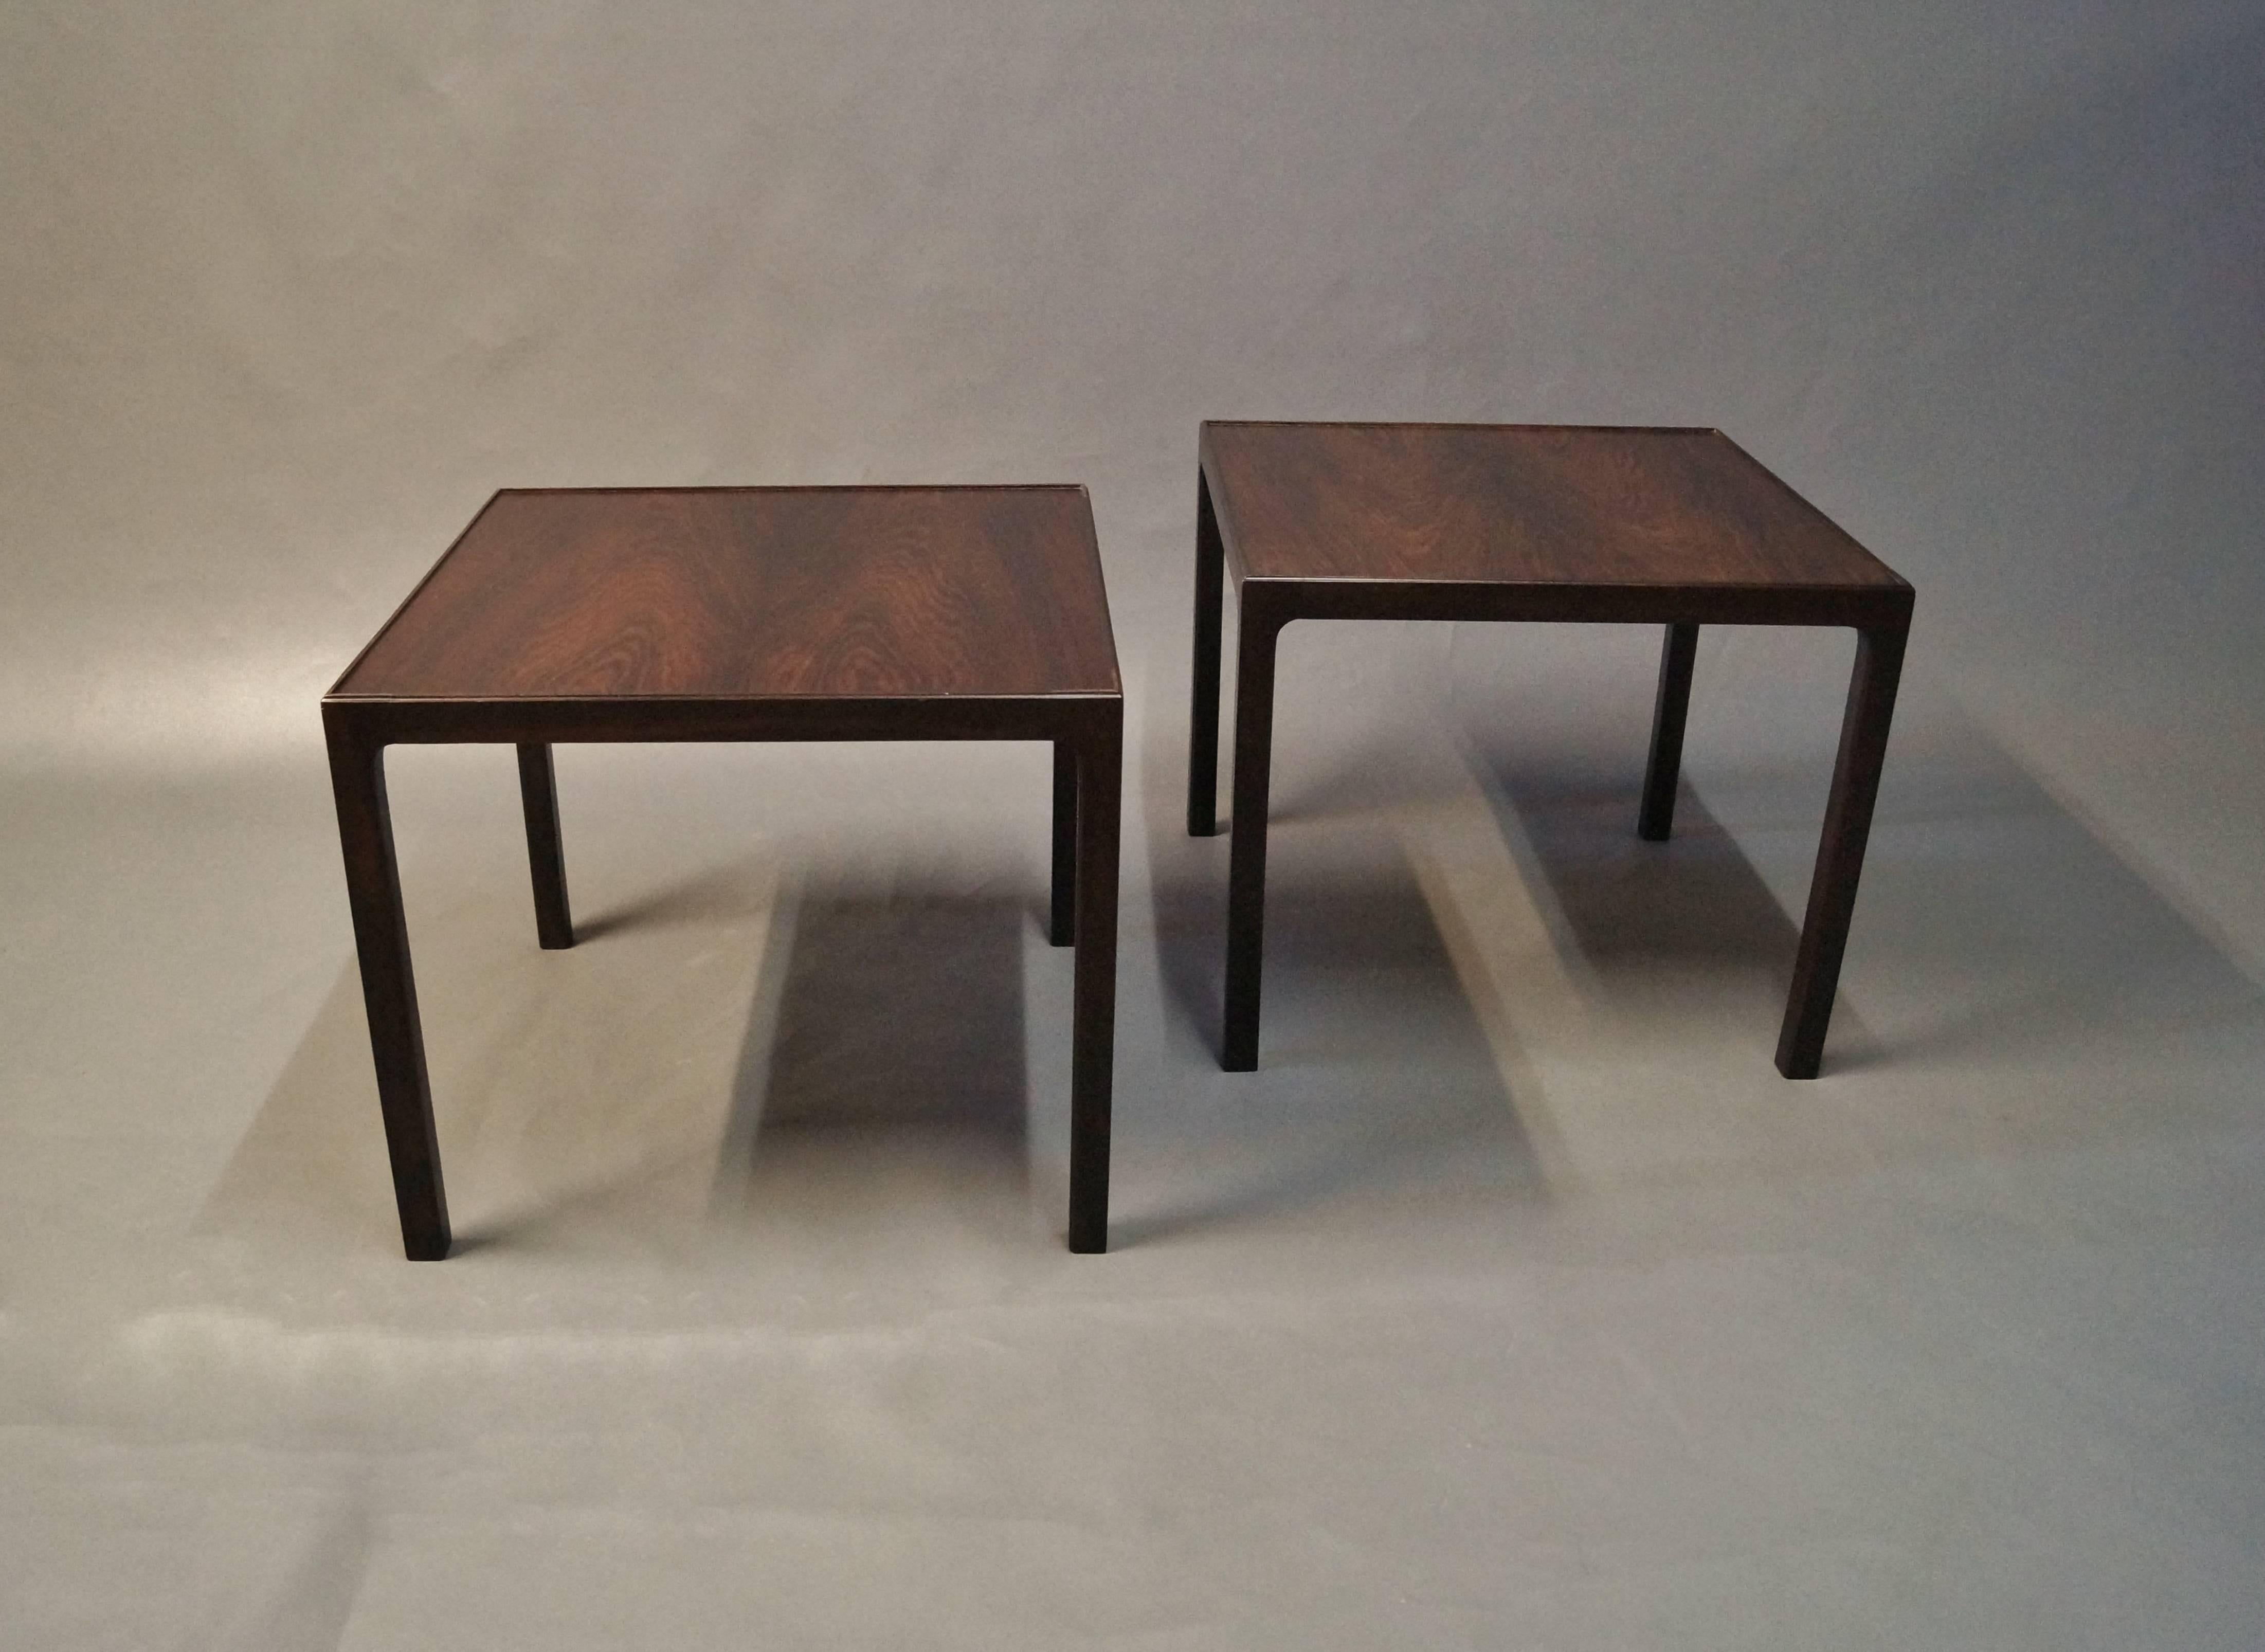 Scandinavian Modern Couple of Lamp Tables in Rosewood from Silkeborg Furniture Factory, 1960s